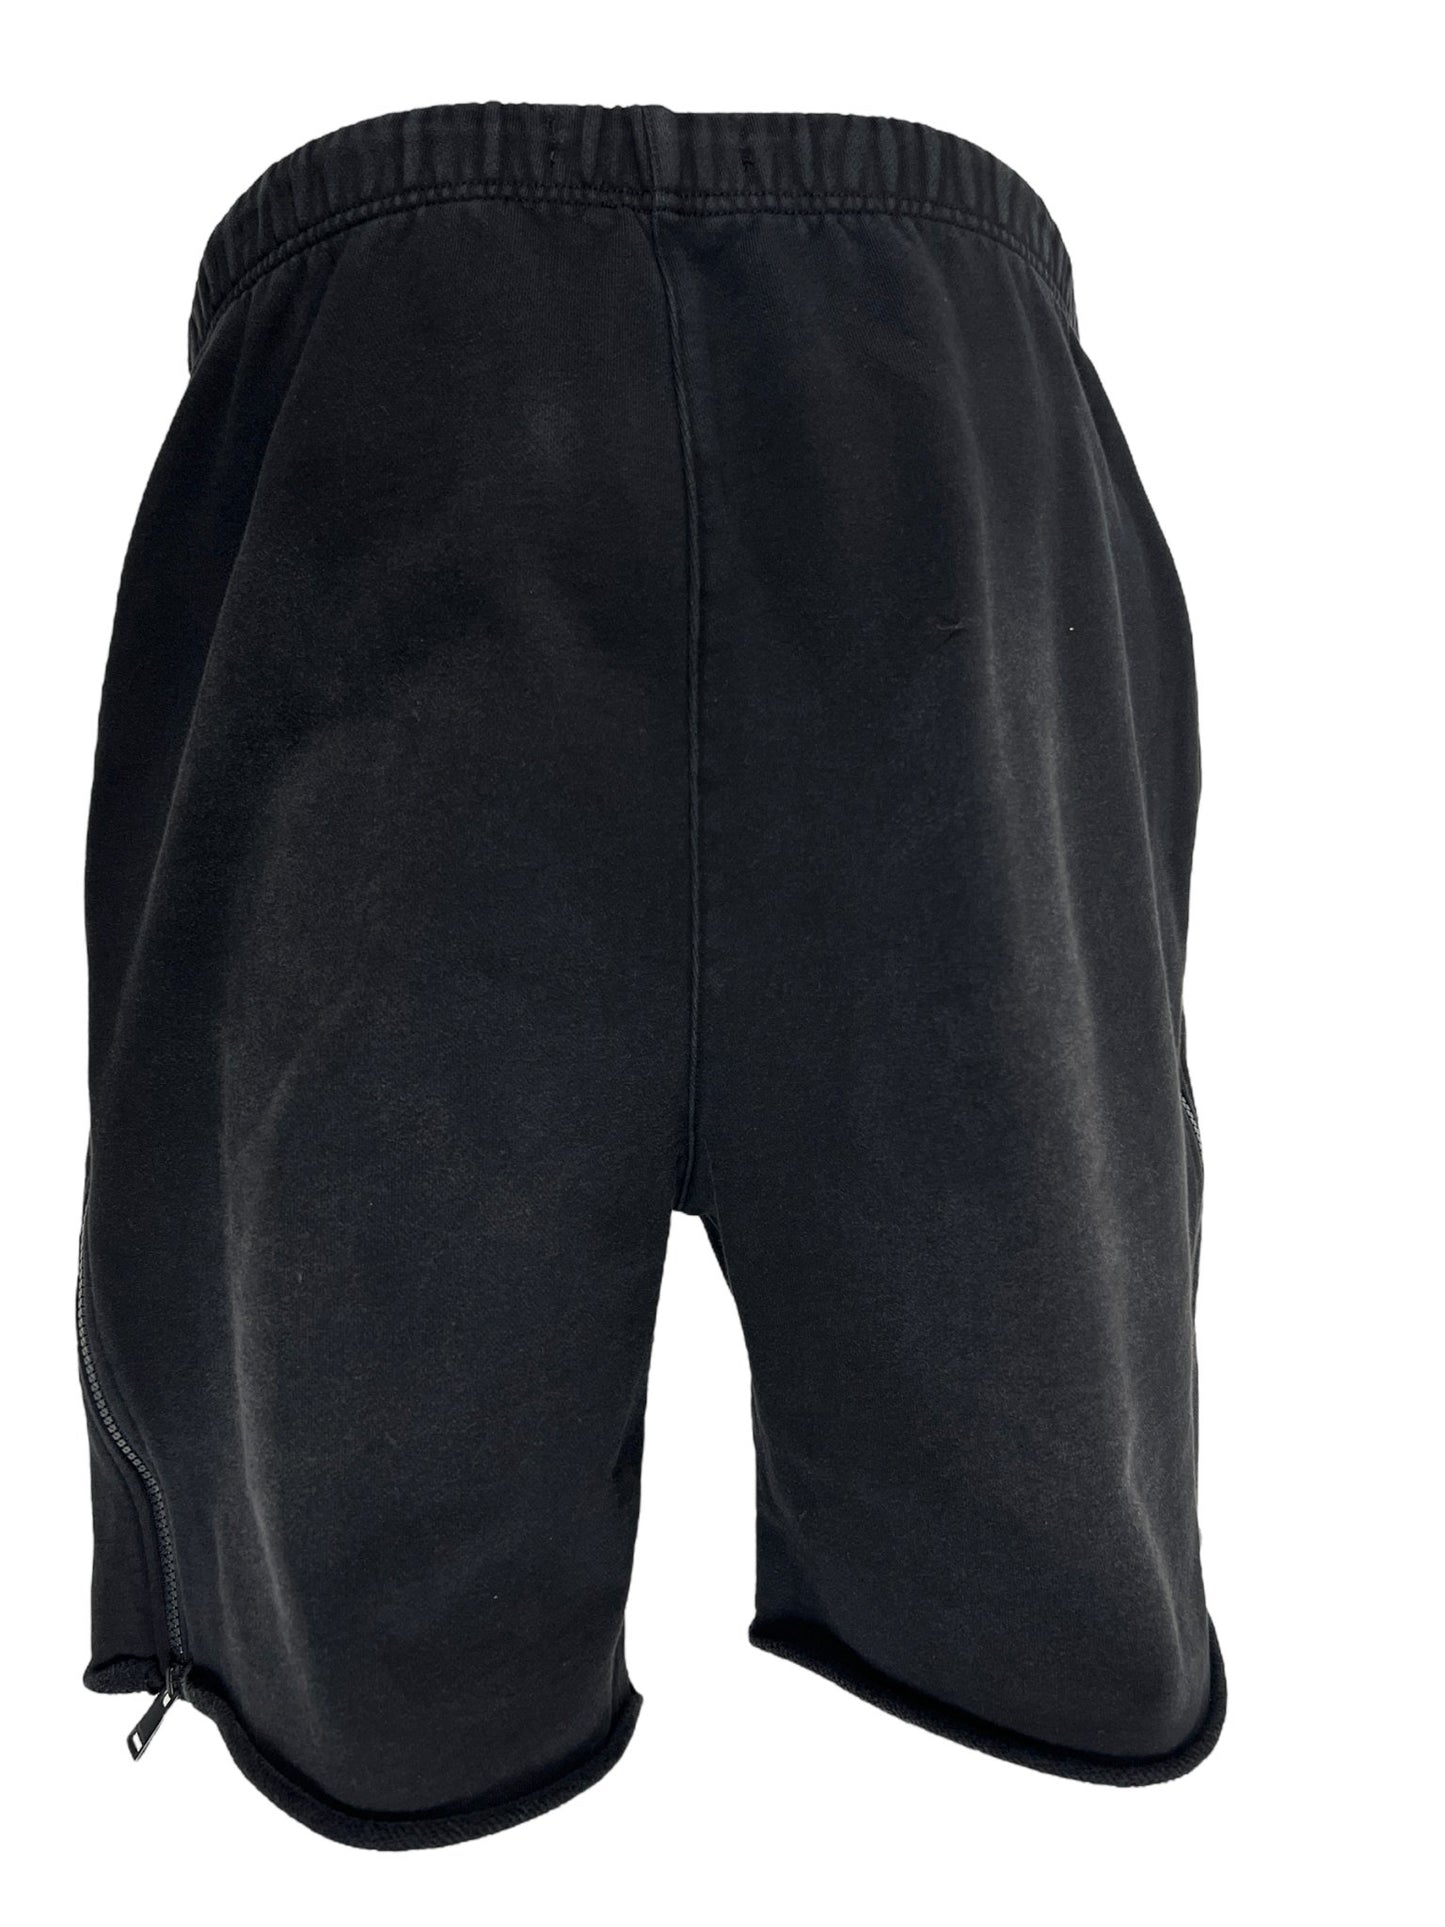 A pair of PURPLE BRAND P479-MFBW MWT FLEECE SWEATSHORT BLACK with an elastic waistband and visible stitching, shown from the back, crafted by PURPLE BRAND.